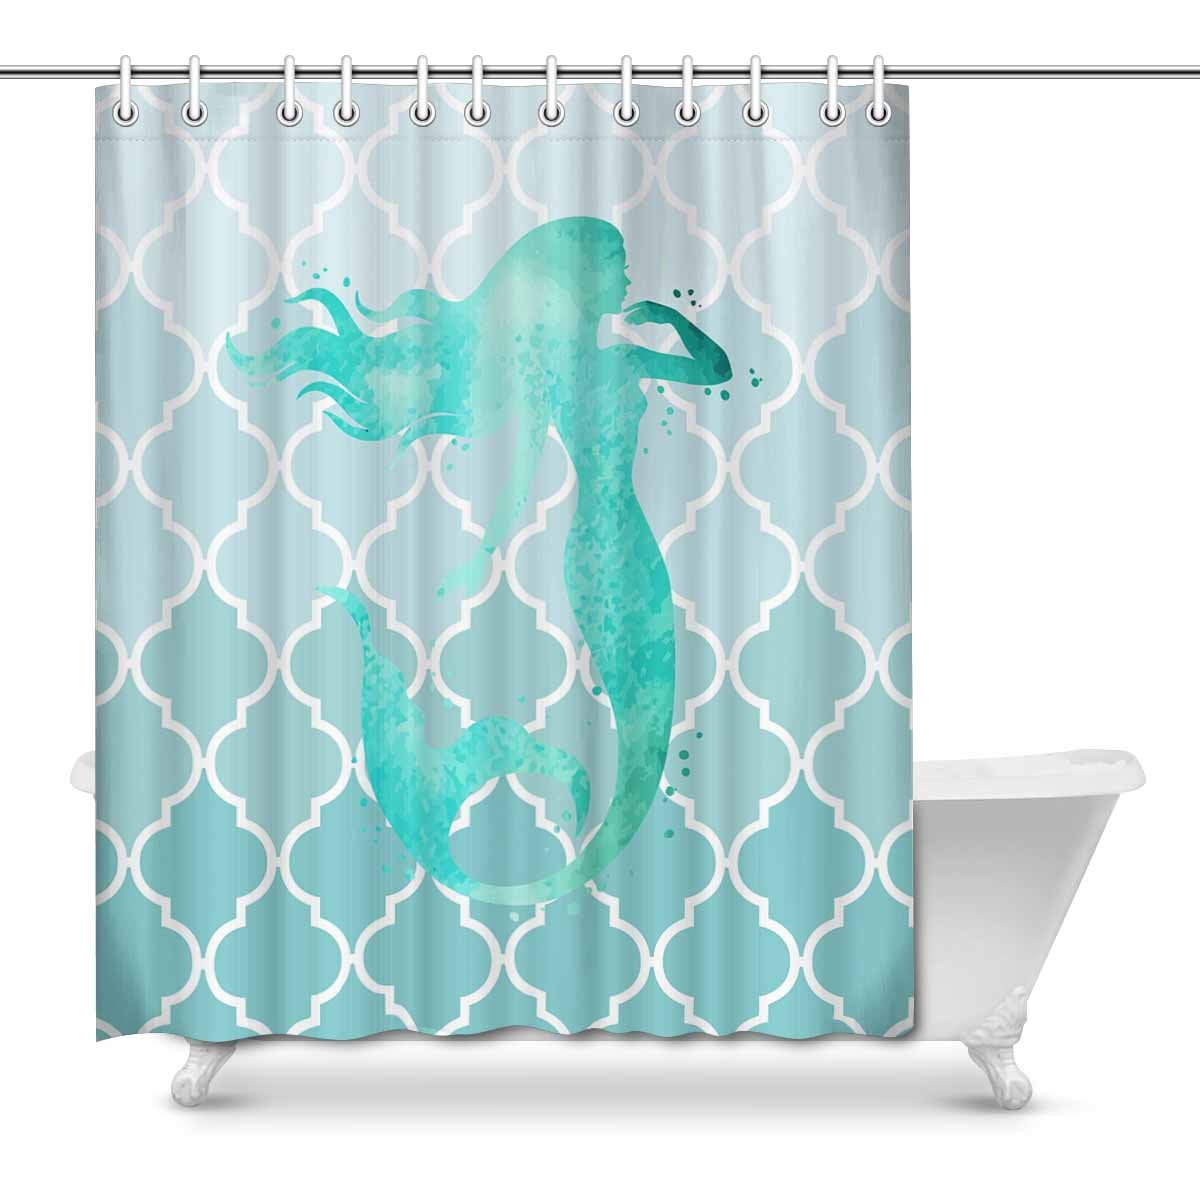 72x72" Watercolor Crab Polyester Fabric Shower Curtain Bathroom Decor w/ Hooks